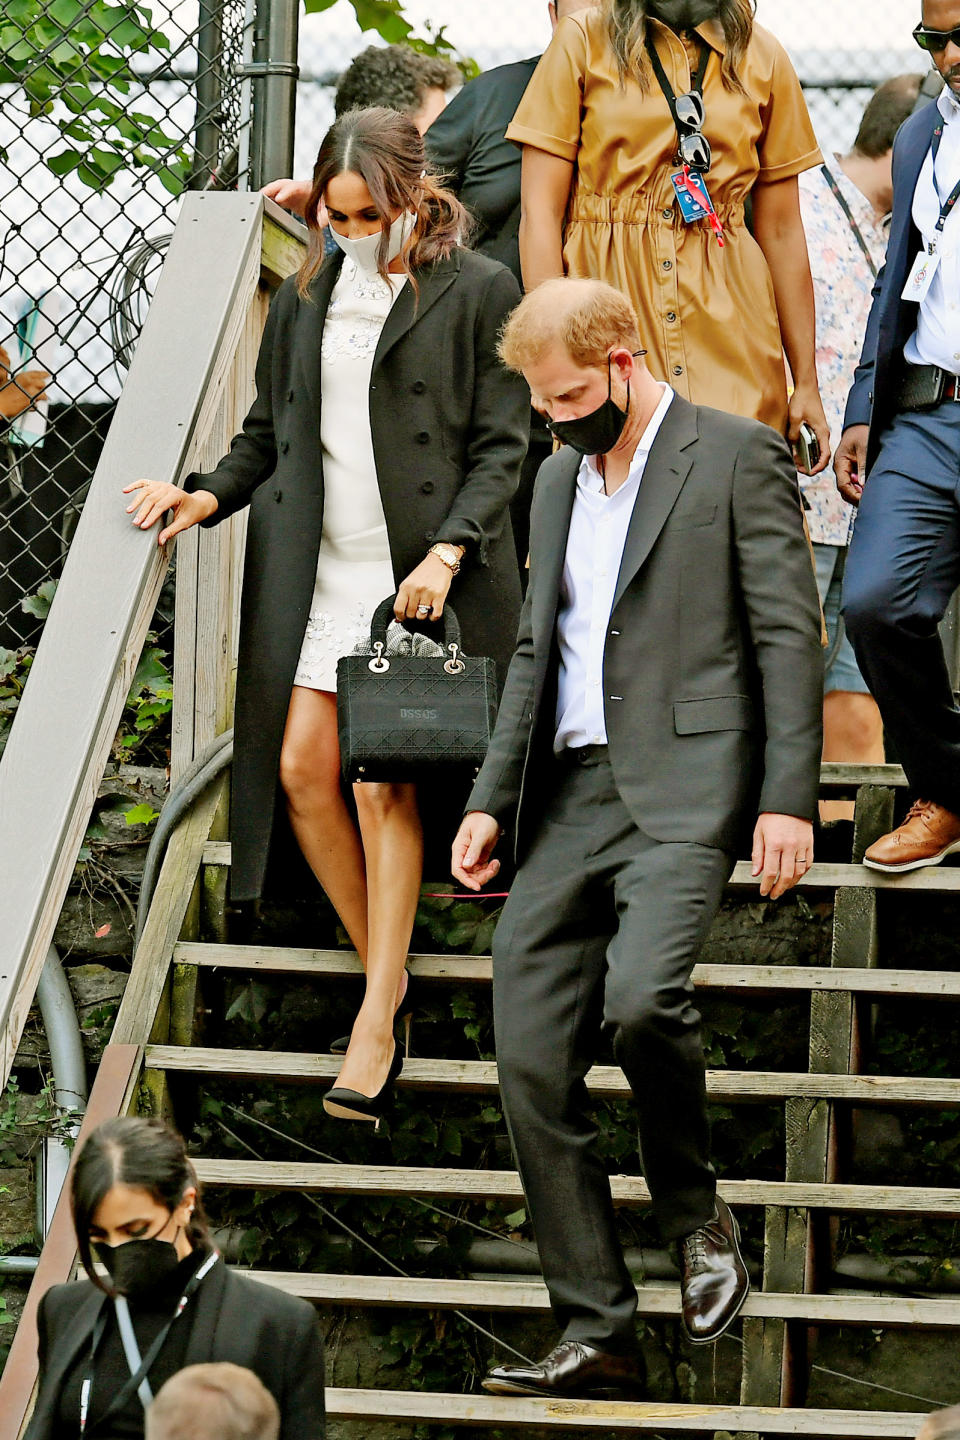 Prince Harry and Meghan Markle leave Global Citizen Live at New York City’s Central Park. - Credit: MEGA